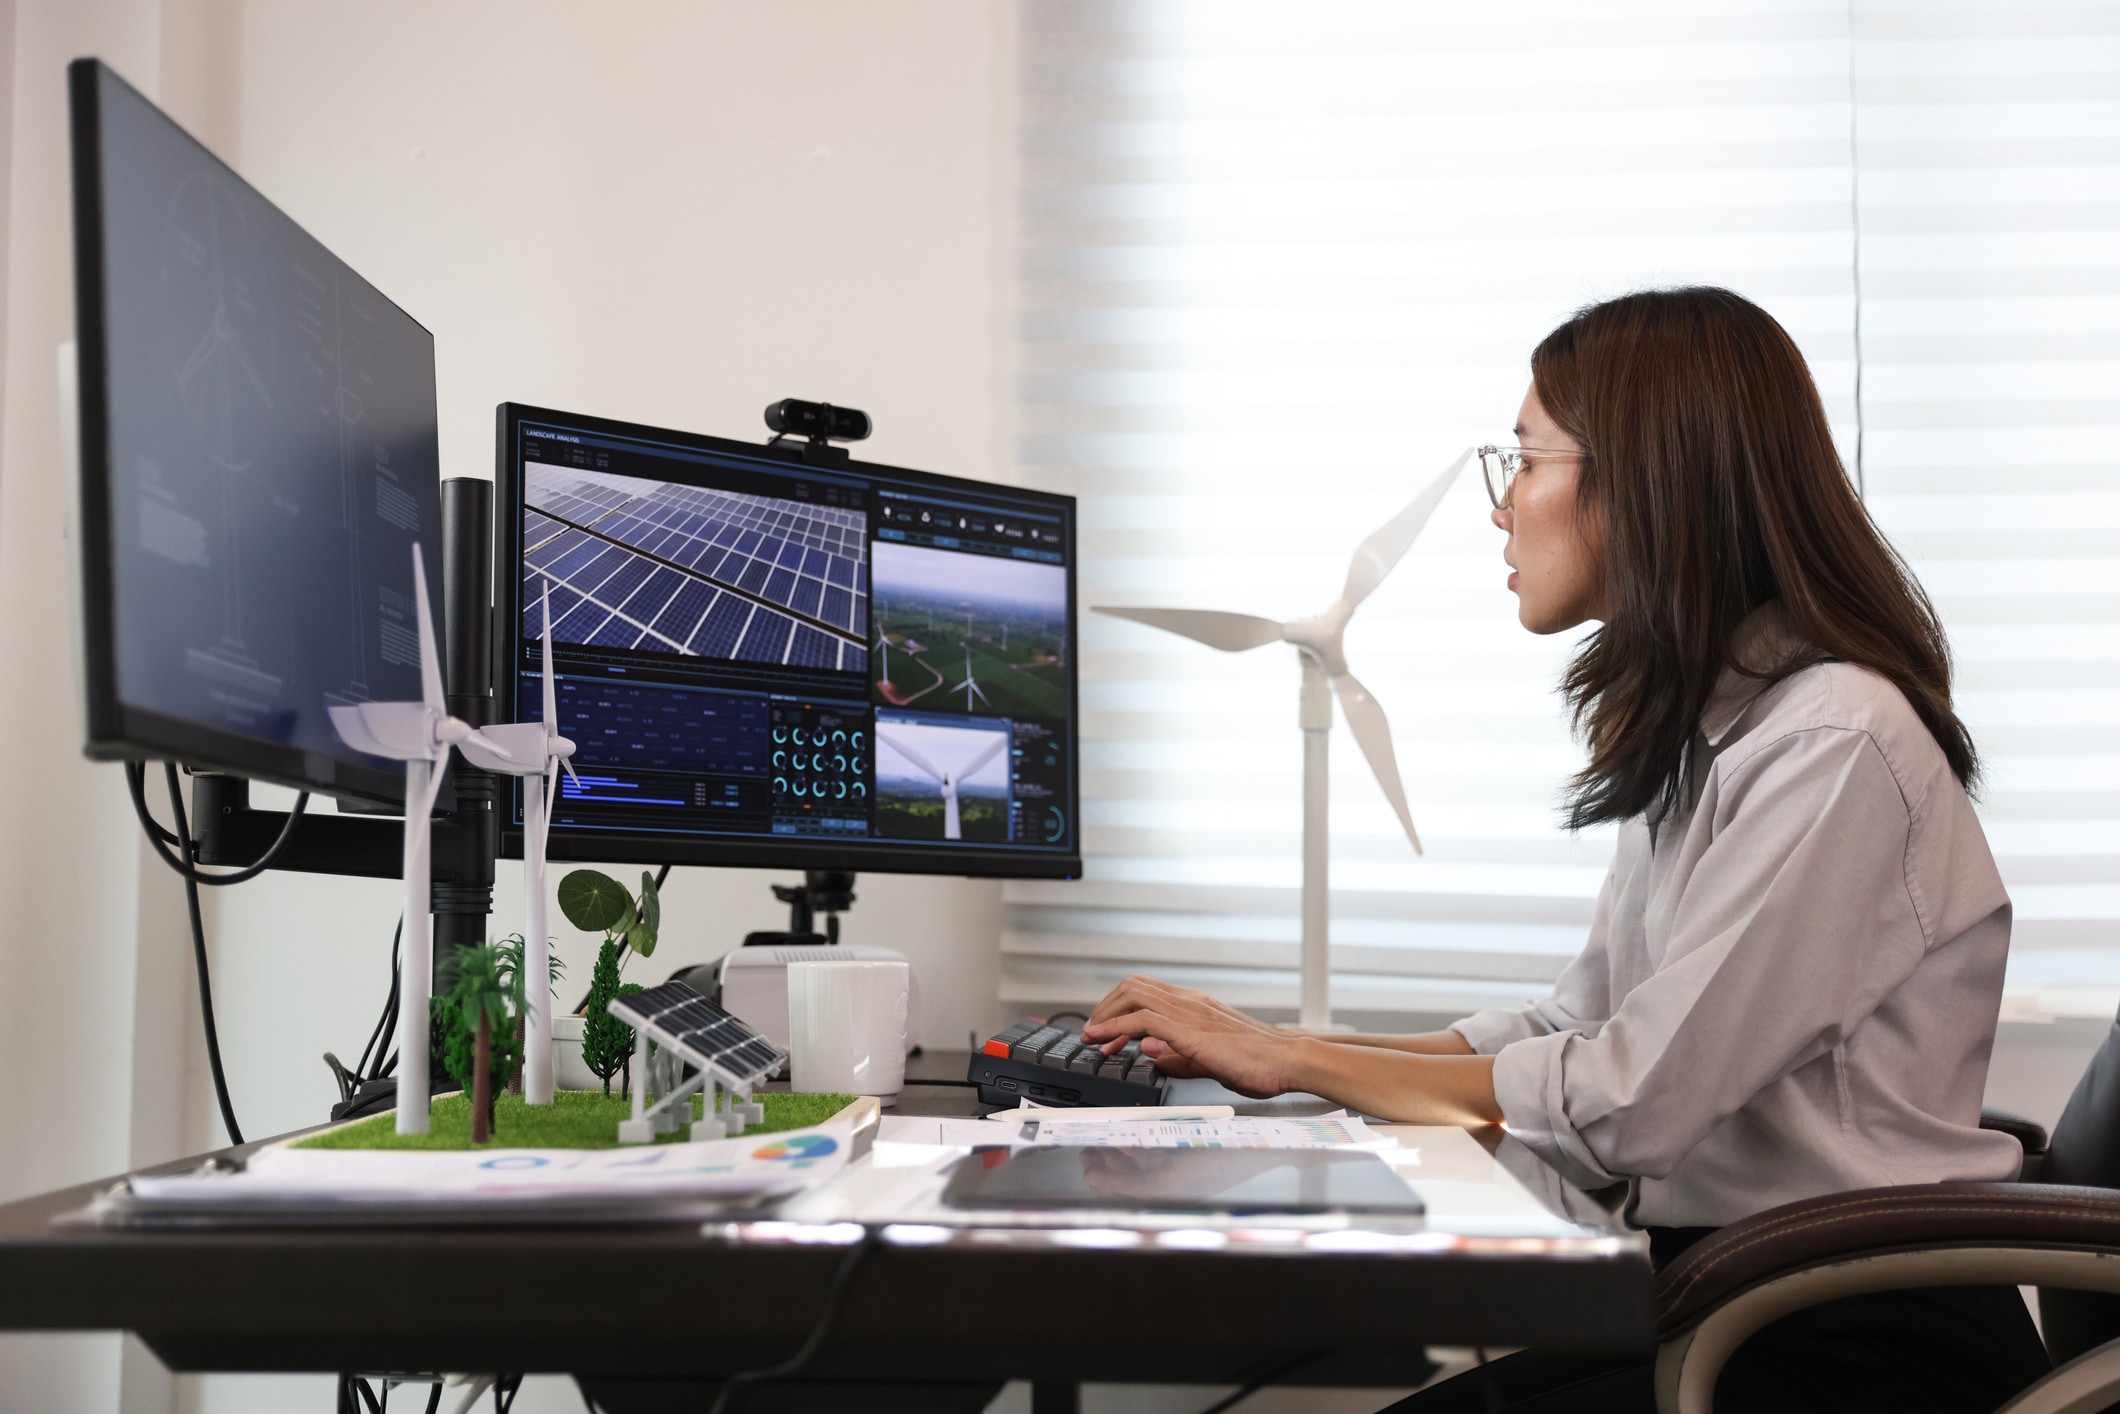 A woman works on a computer at a desk with model of renewable energy equipment